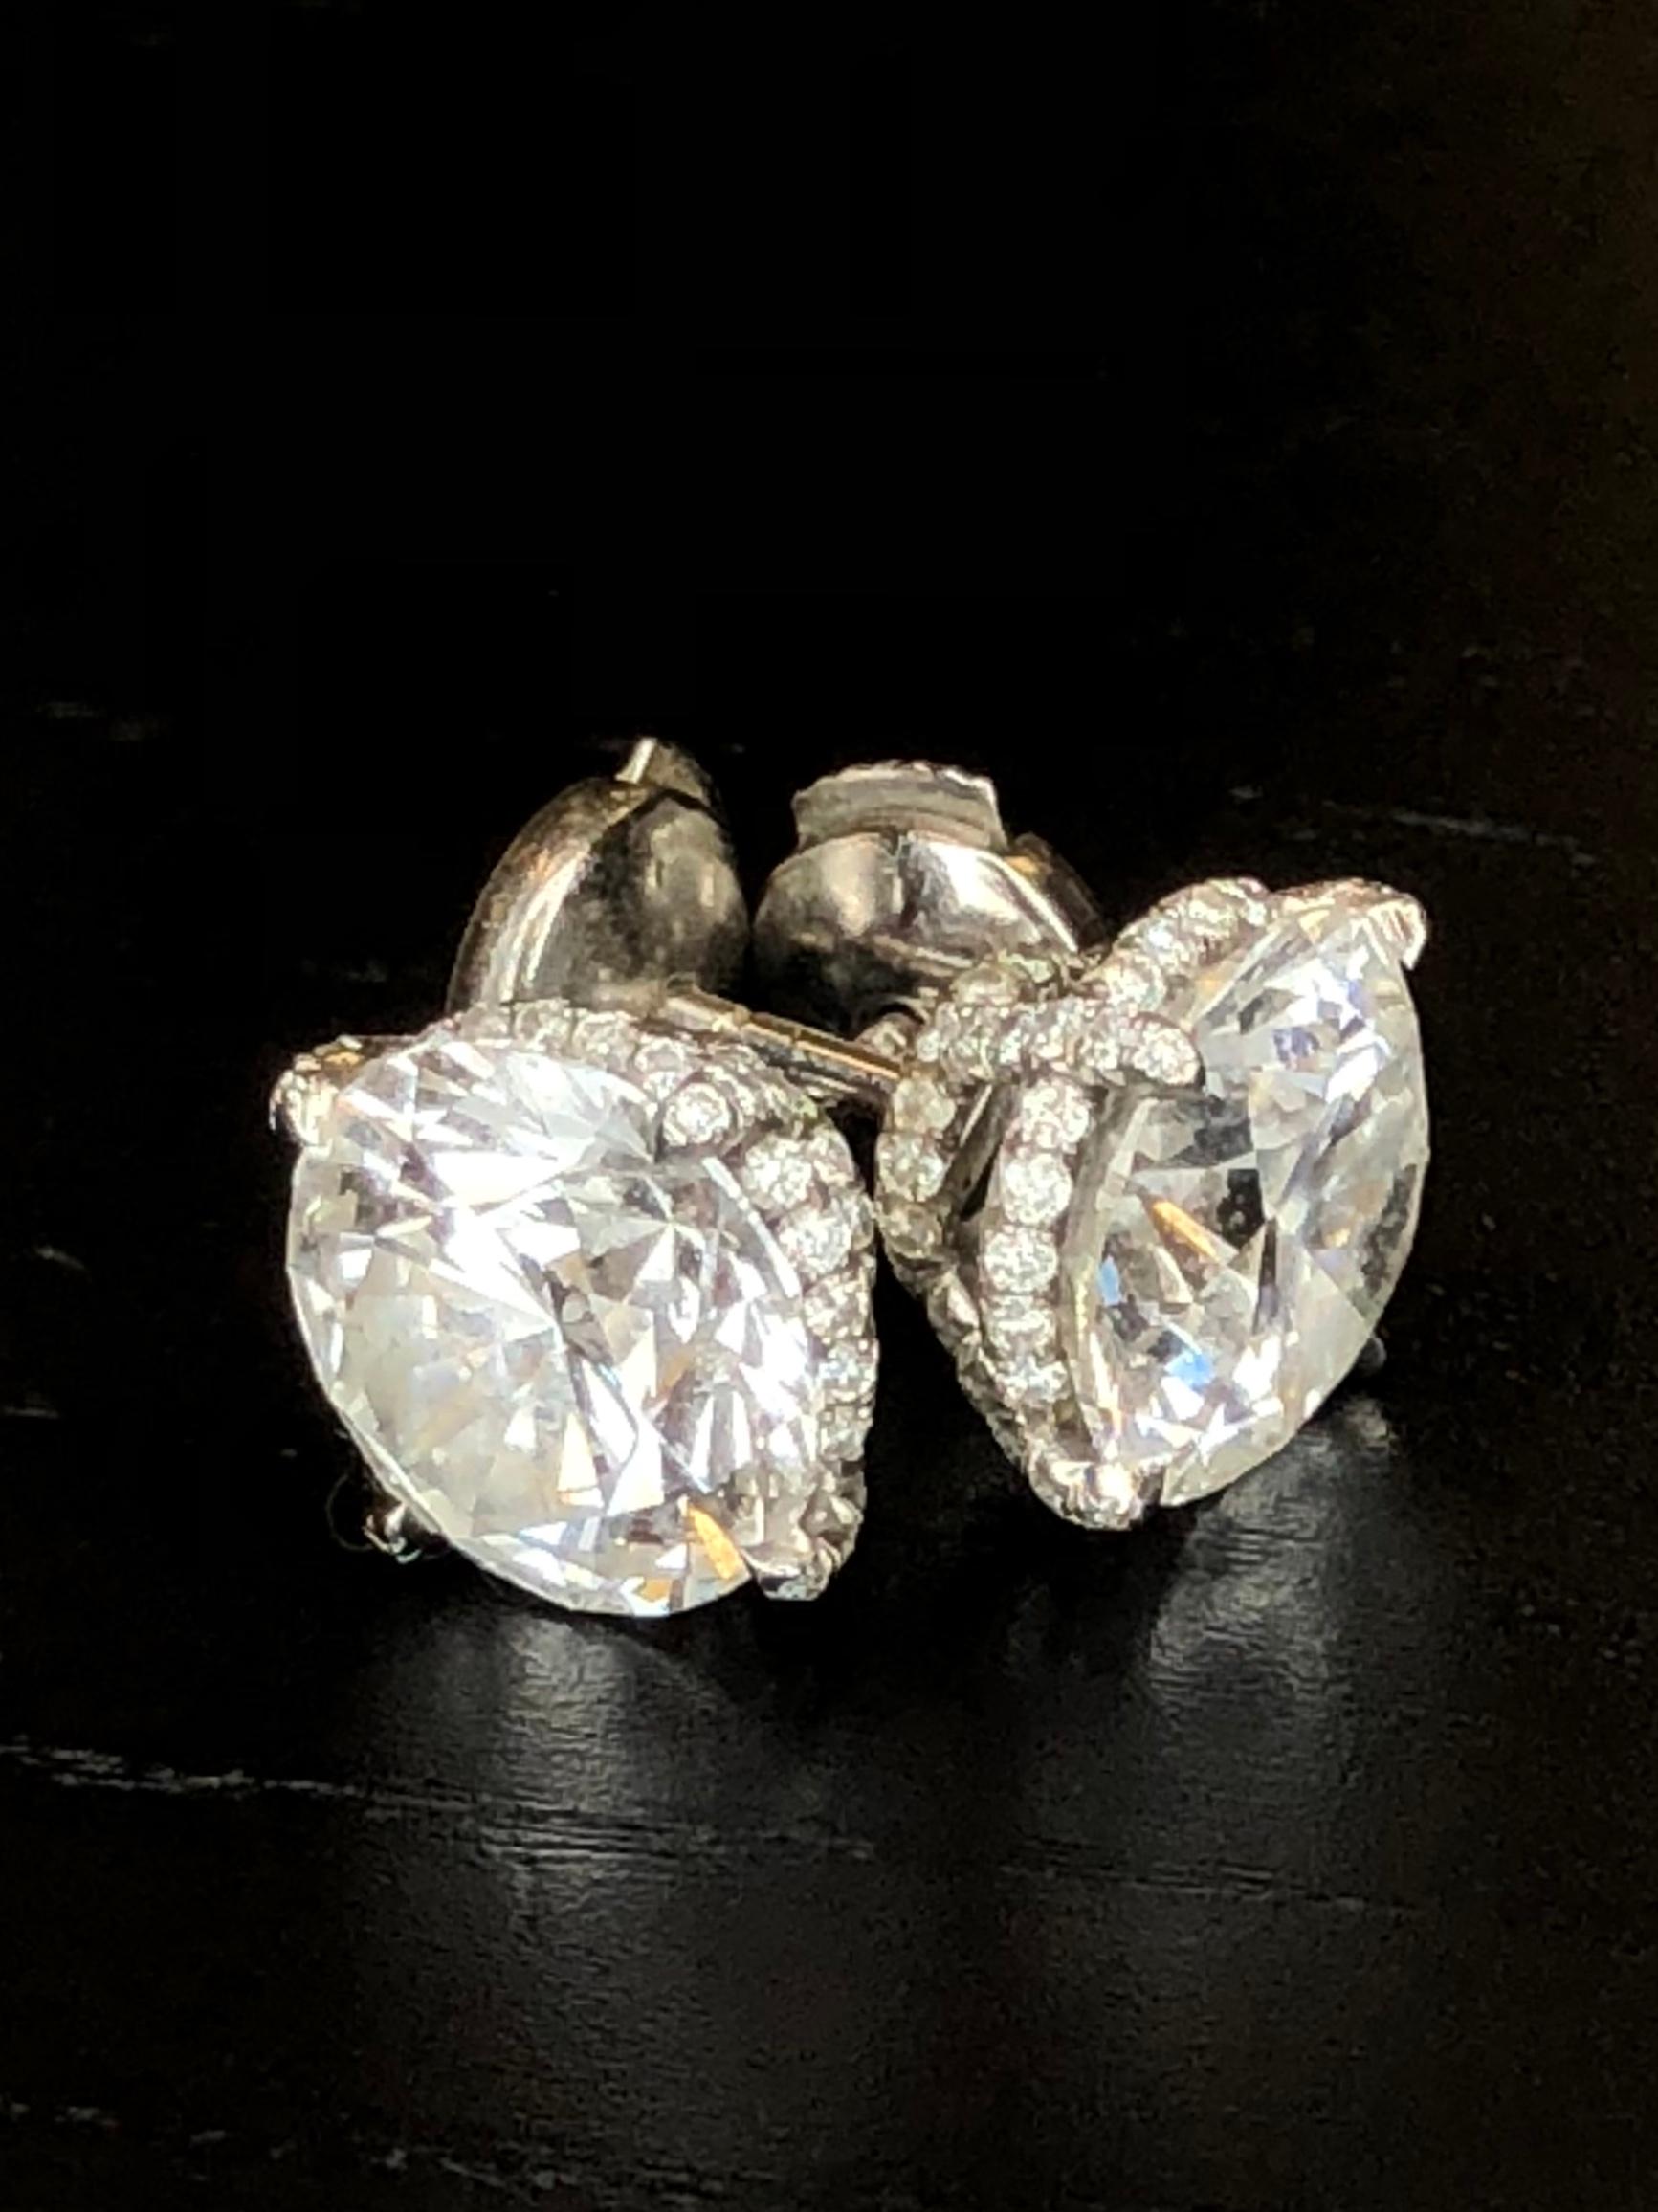 A platinum pair of stud earrings containing two 3.50 ct and 3.51 ct Round Brilliant Diamonds set in a pave diamond four prong setting. 3.50ct G Color VS1 Clarity Triple Excellent Diamond and a 3.51 G Color VS1 Clarity Triple Excellent Diamond for a